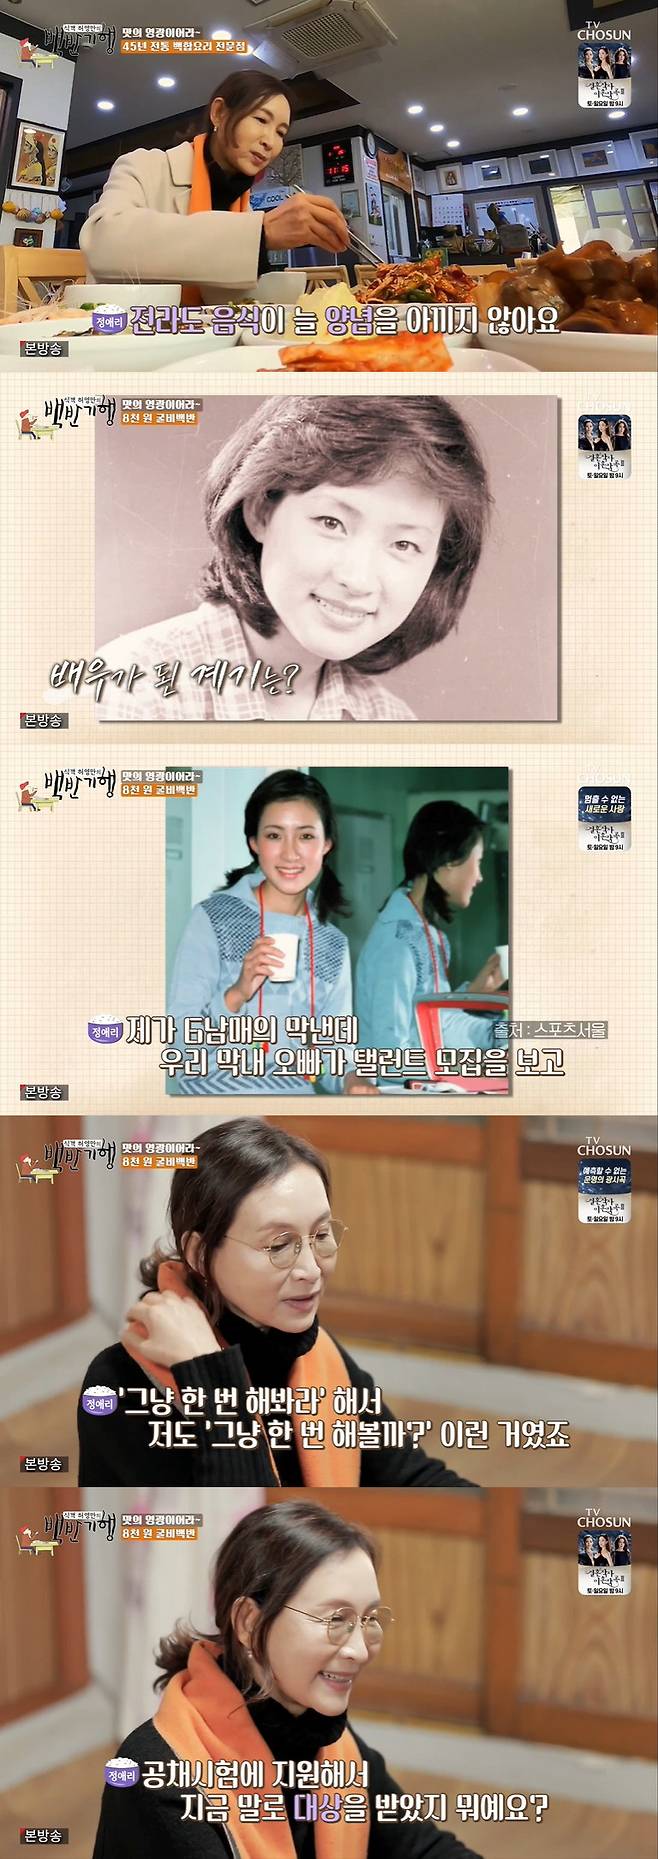 White Half Travel Jung Ae-ri Confessions about battling ovarian cancerActor Jung Ae-ri appeared as a guest in the TV Chosun Huh Young Mans Food Travel broadcast on the 11th.The place where Jung Ae-ri and Huh Young-man left on this day is Jeonnam Glory. Glory is also home to Jung Ae-ri. The first place to head is 45-year-old lilies restaurant.Jung Ae-ri ate delicious ingredients and spices, saying, Jeonrado food does not spare spices.Jung Ae-ri, who debuted in 1978 and has already been in his 45th year, said, I was the youngest of the six brothers and sisters.I went out and now I have been awarded a prize. I became a talent then. Jung Ae-ri, who became stardom after his debut with Love and War, said he realized his popularity by saying, I won first place in a magazine called TV Guide.Huh Young-man headed to a seasonal fish cookery following the gulbi for Jung Ae-ri, who likes fish dishes.No one knew Jung Ae-ri whenever he went to the restaurant.Jung Ae-ri told the envious Huh Young-man, My aunt once served here and (a oriental doctor) grandfather gave free medical treatment, so many people came.When Huh Young-man said, Its a hard-working family, Jung Ae-ri admitted, I guess I did.The word Jung Ae-ri is a service. Jung Ae-ri said, I went to an infant school 30 years ago to shoot a drama. There were over 100 children.I came out to the director and said that I would come back, but I liked the promise. It was time to start going like that. Jung Ae-ri said: Then I saw the disabled, the elderly, and the third world children, I am the head of these children.I think I will save my children as a family, he said. I can not do that now, but I sponsored 10 million won every month for more than 10 years.I can not do it because I do not work so far now. Jung Ae-ri presented his third essay to Huh Young-man, who also had a short short cut inside the essay.Jung Ae-ri said, I was sick in 2016 and I had chemotherapy because of ovarian cancer. Womens cancer is 100% headless.After the chemotherapy, I wanted to remember the day I cut my head and cut it off. Jung Ae-ri said, At that time, I had to eat protein to endure chemotherapy, but I ate a lot of meat.Sometimes I ate 100g and 200g per meal, he said. It is over now. It is rather fleshy at that time. 